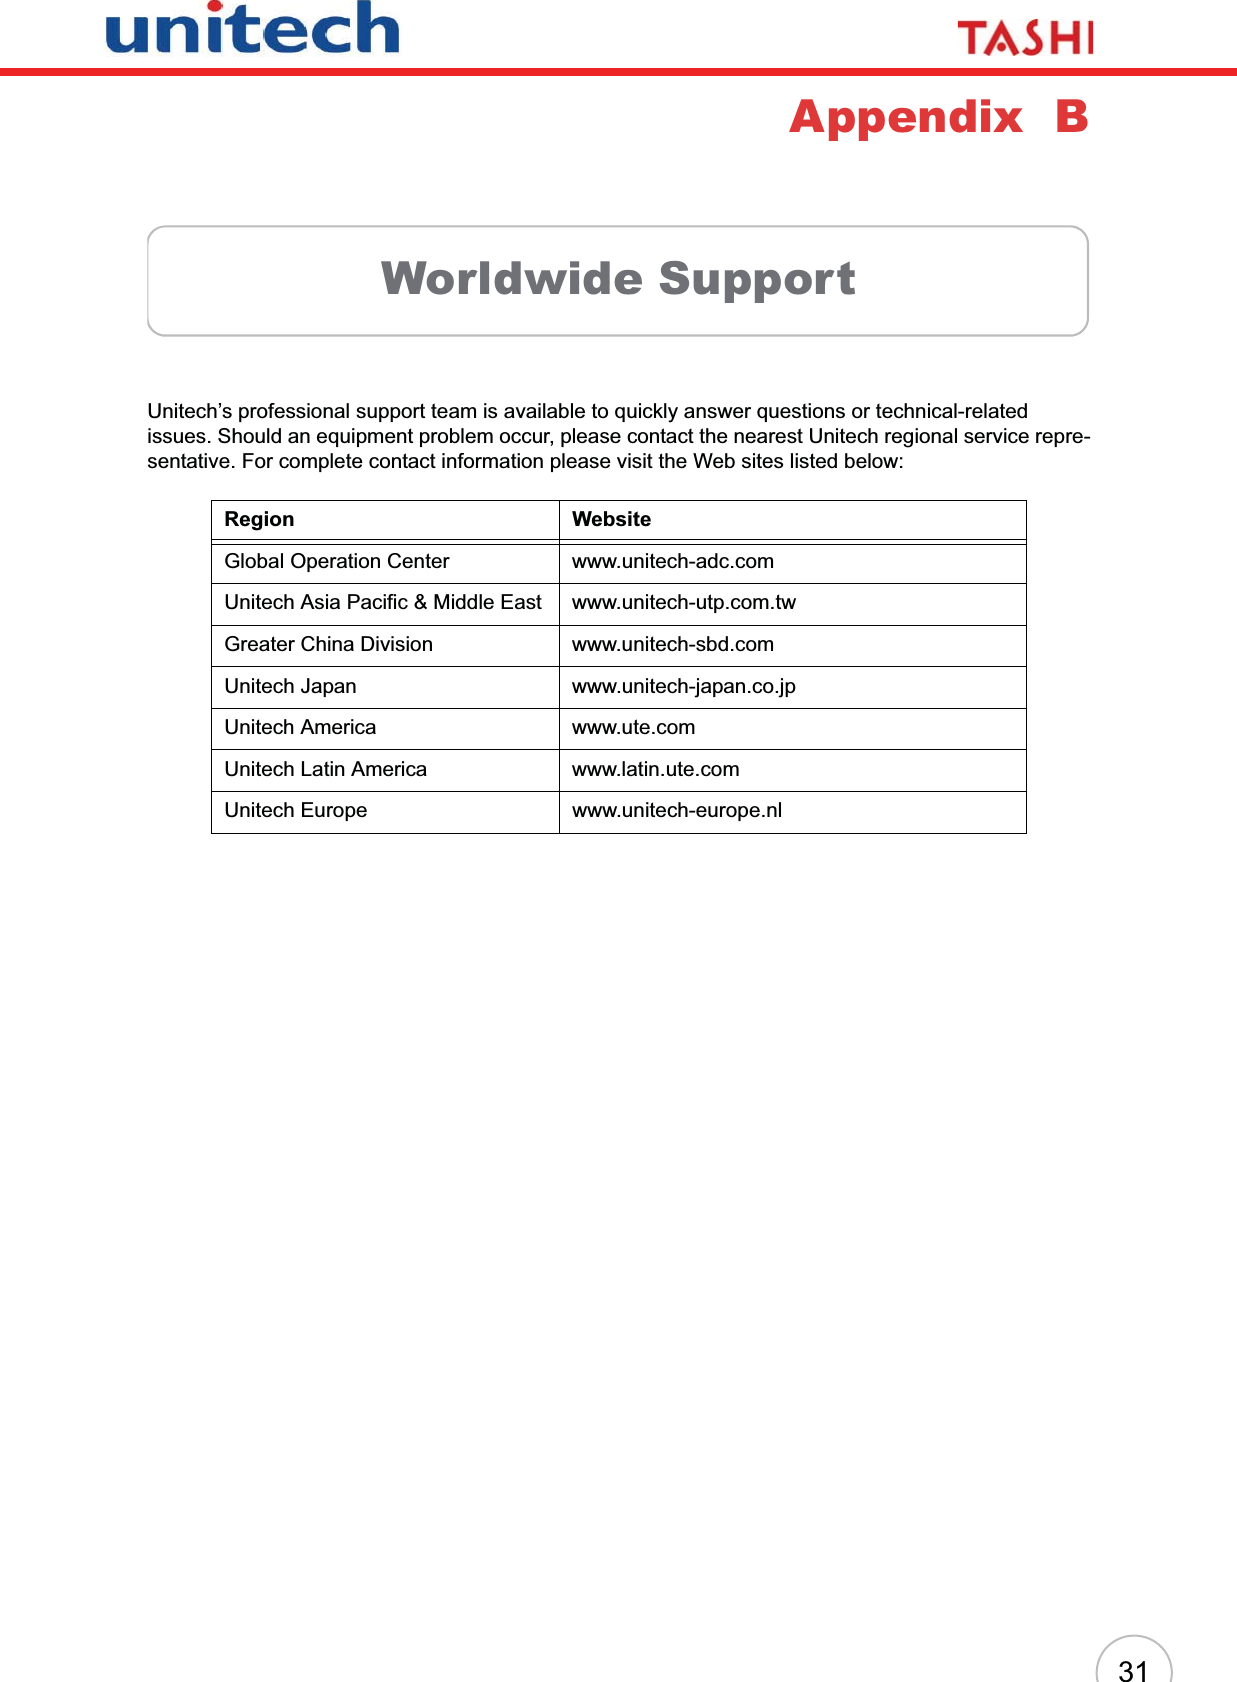 31Appendix  BWorldwide SupportUnitech’s professional support team is available to quickly answer questions or technical-related issues. Should an equipment problem occur, please contact the nearest Unitech regional service repre-sentative. For complete contact information please visit the Web sites listed below:Region WebsiteGlobal Operation Center www.unitech-adc.comUnitech Asia Pacific &amp; Middle East www.unitech-utp.com.twGreater China Division www.unitech-sbd.comUnitech Japan www.unitech-japan.co.jpUnitech America www.ute.comUnitech Latin America www.latin.ute.comUnitech Europe www.unitech-europe.nl